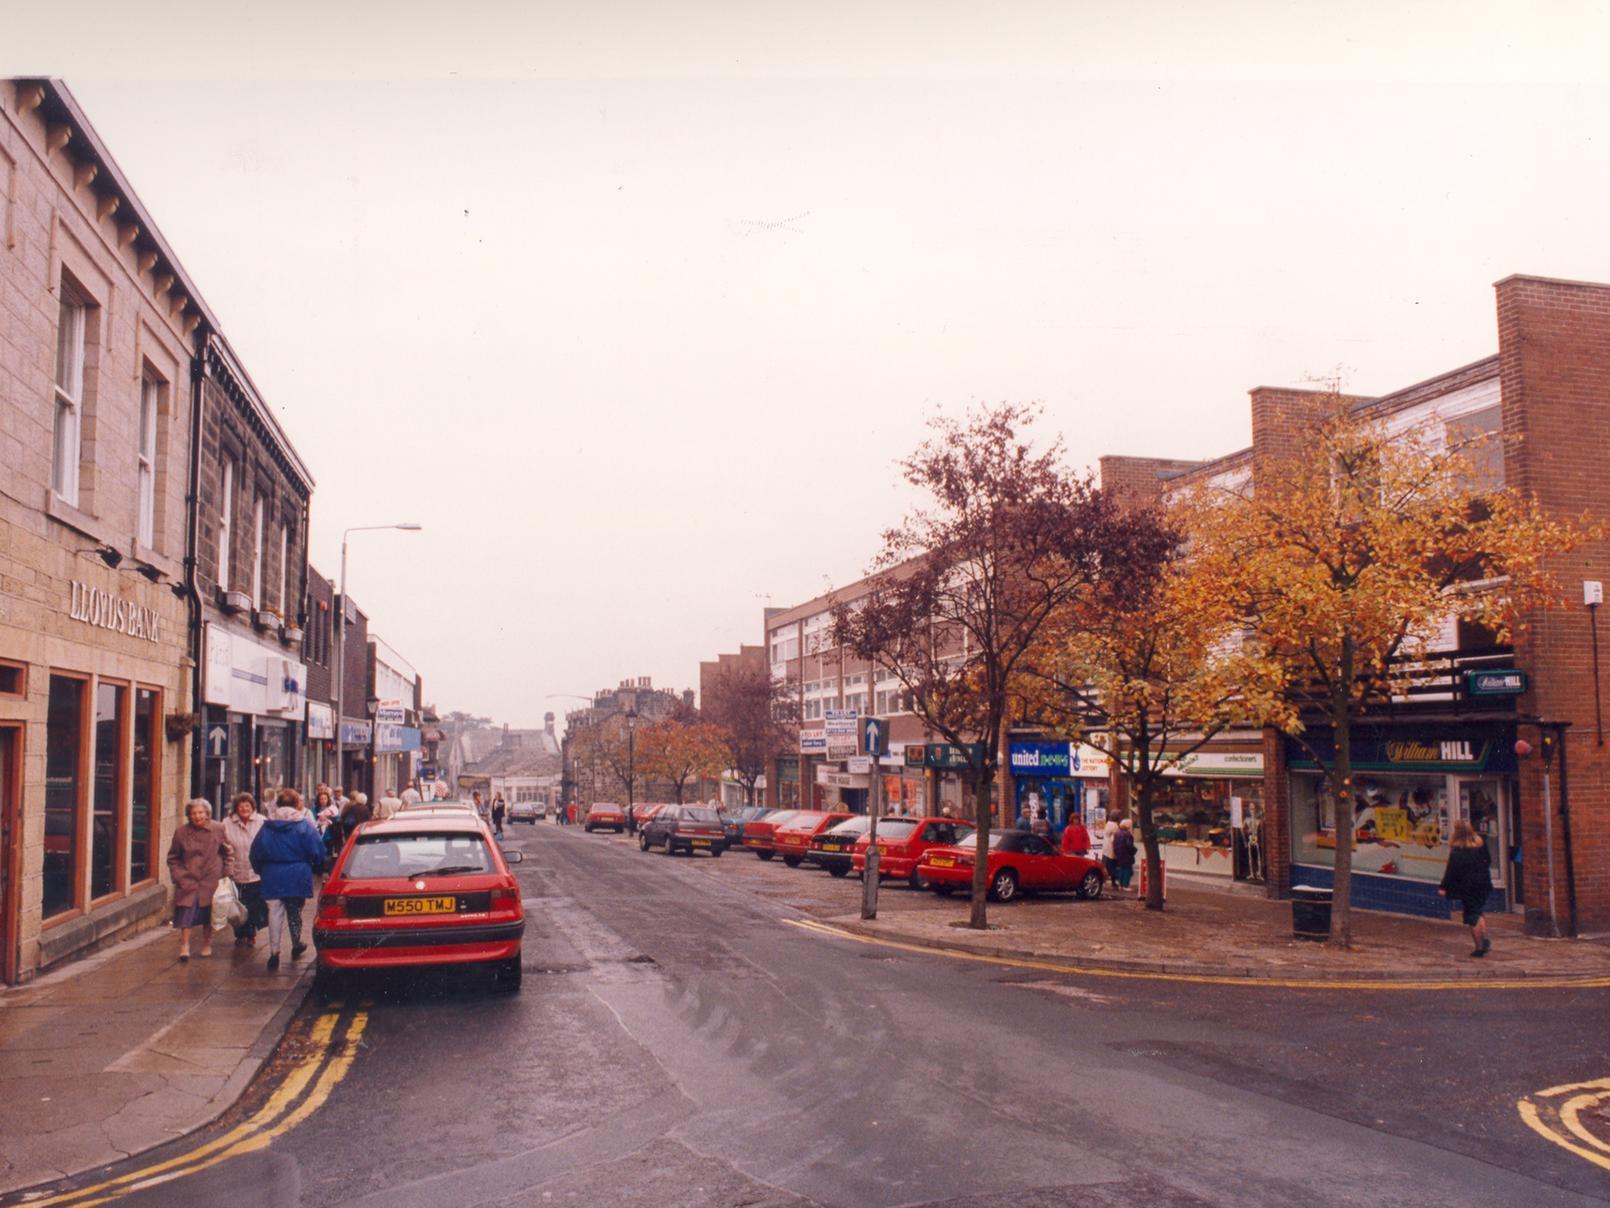 Share your memories of Horsforth down the years with Andrew Hutchinson via email at: andrew.hutchinson@jpress.co.uk or tweet him @AndyHutchYPN